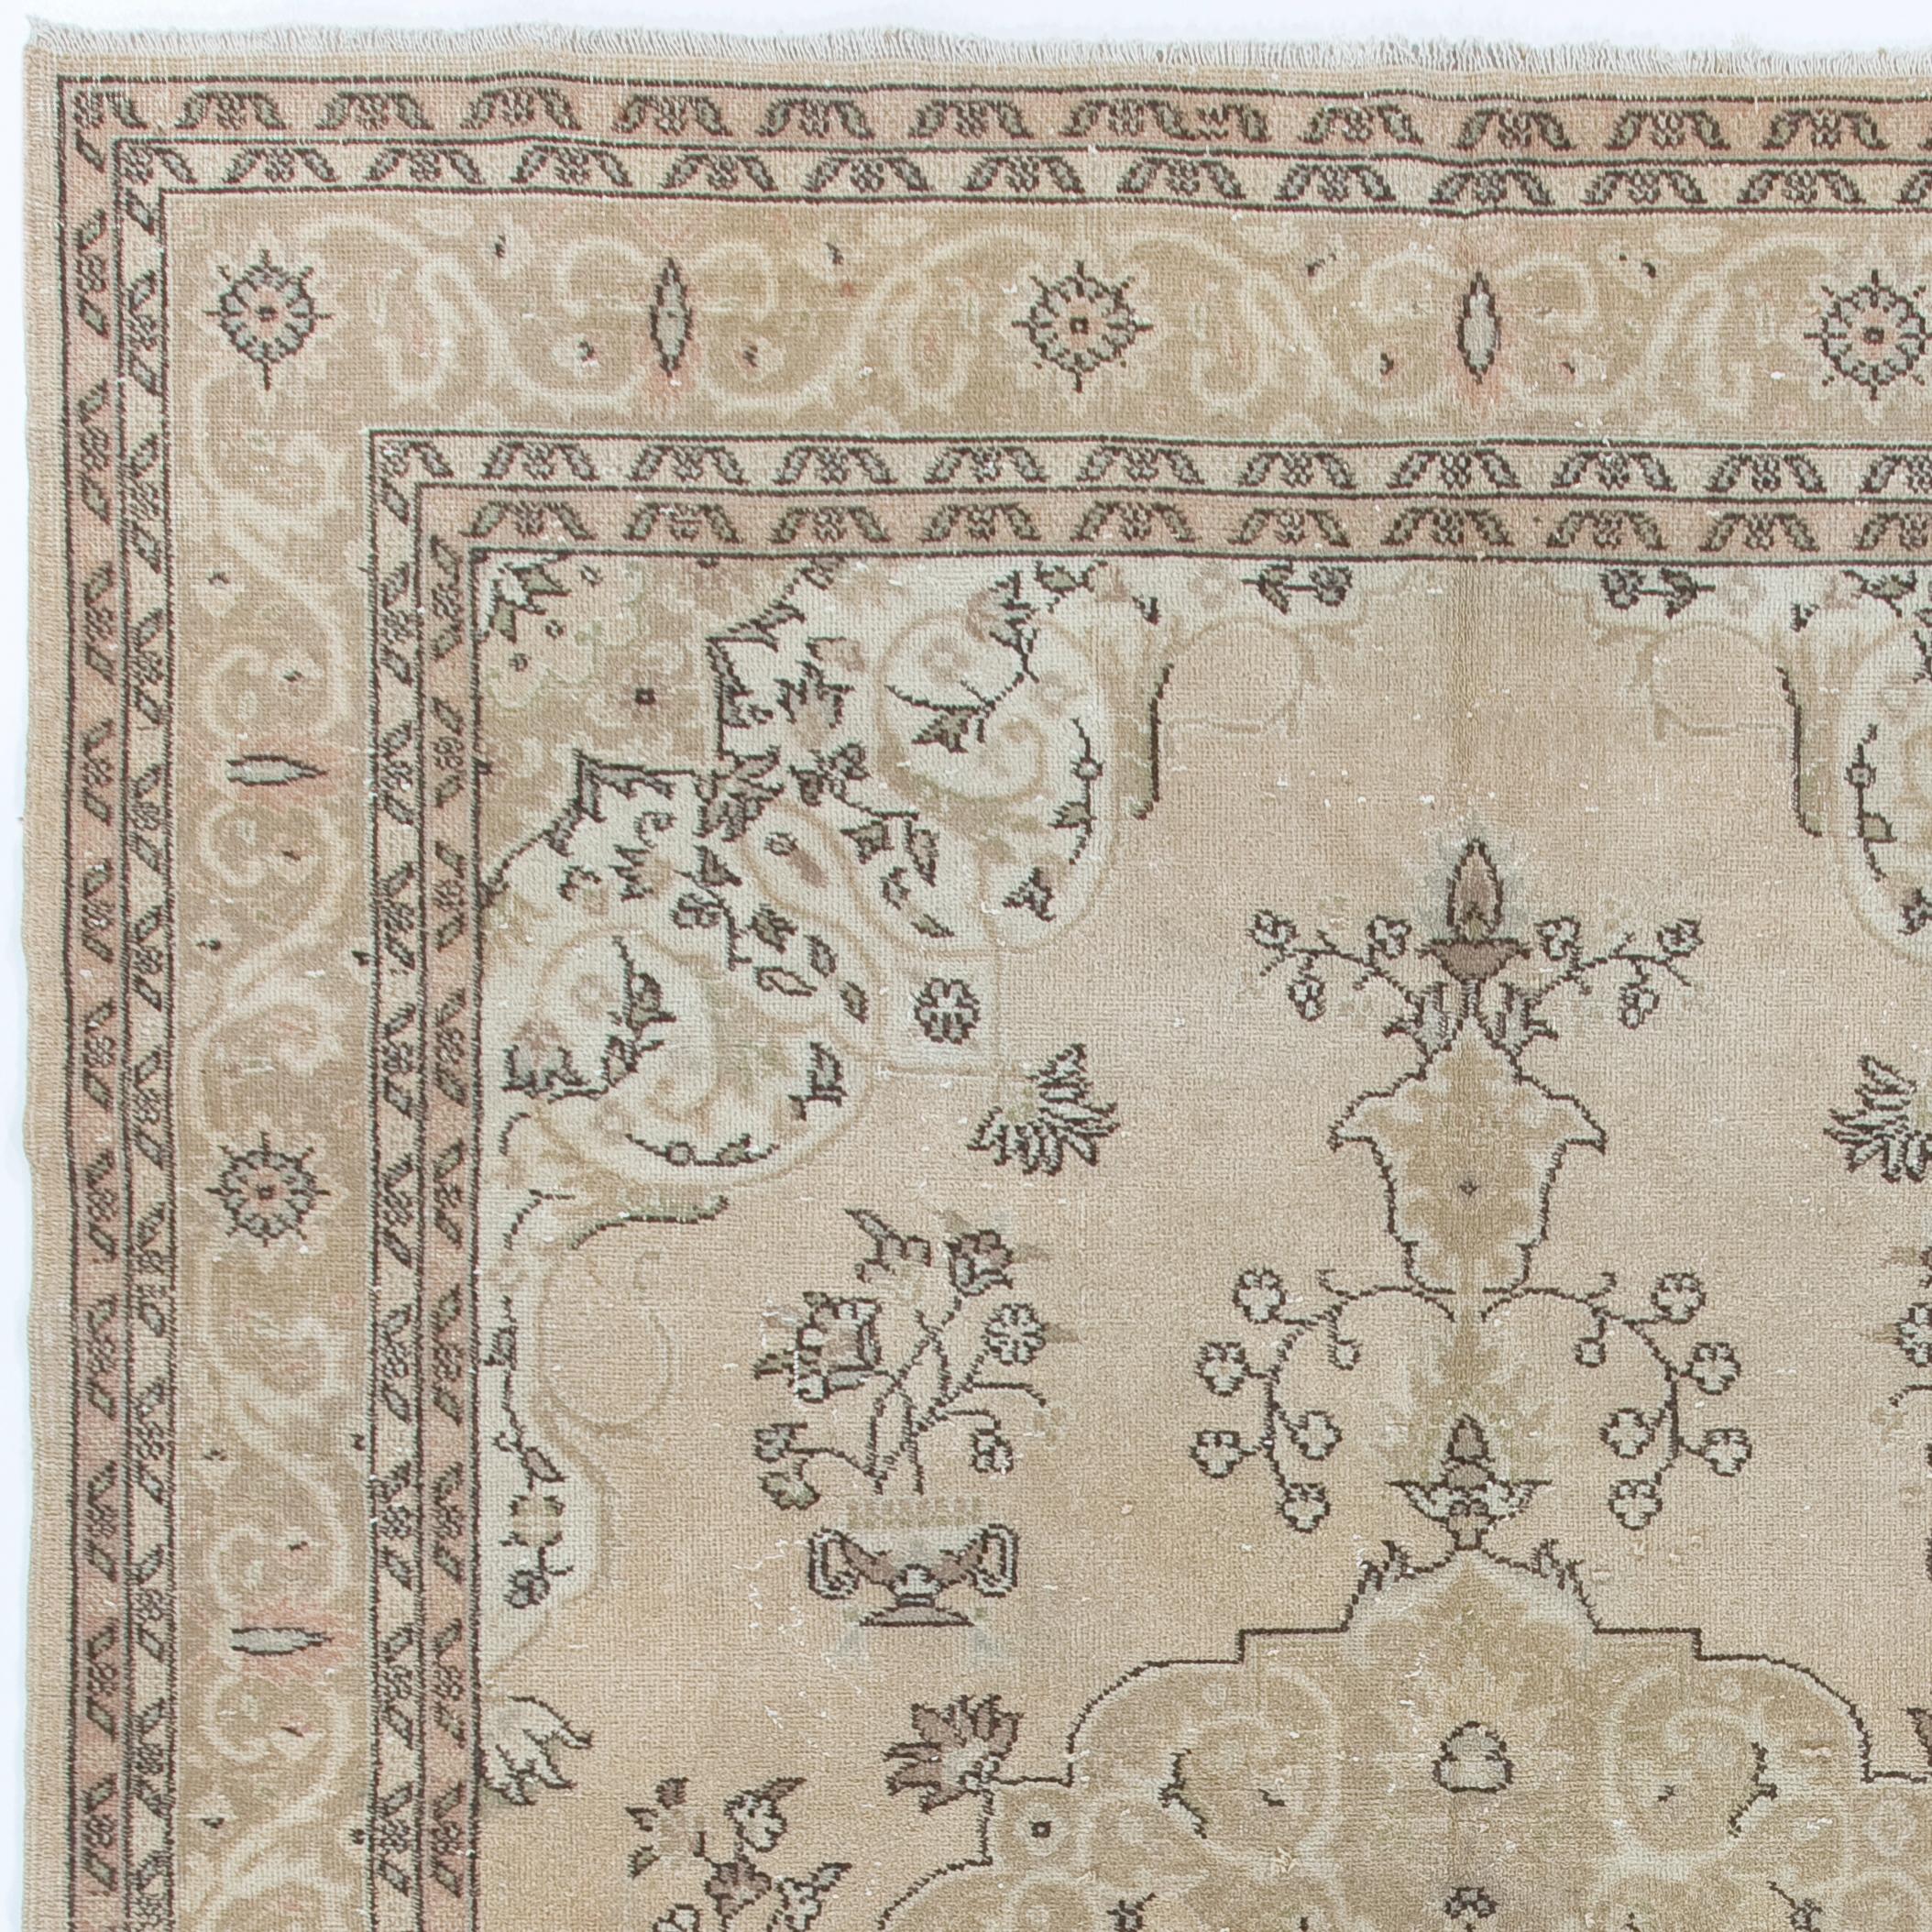 A fine, hand-knotted vintage Turkish area rug with even medium wool pile on cotton foundation. It features a well-drawn design of a central, curvilinear medallion in dark beige and off-white against a lighter, sand-colored field decorated with